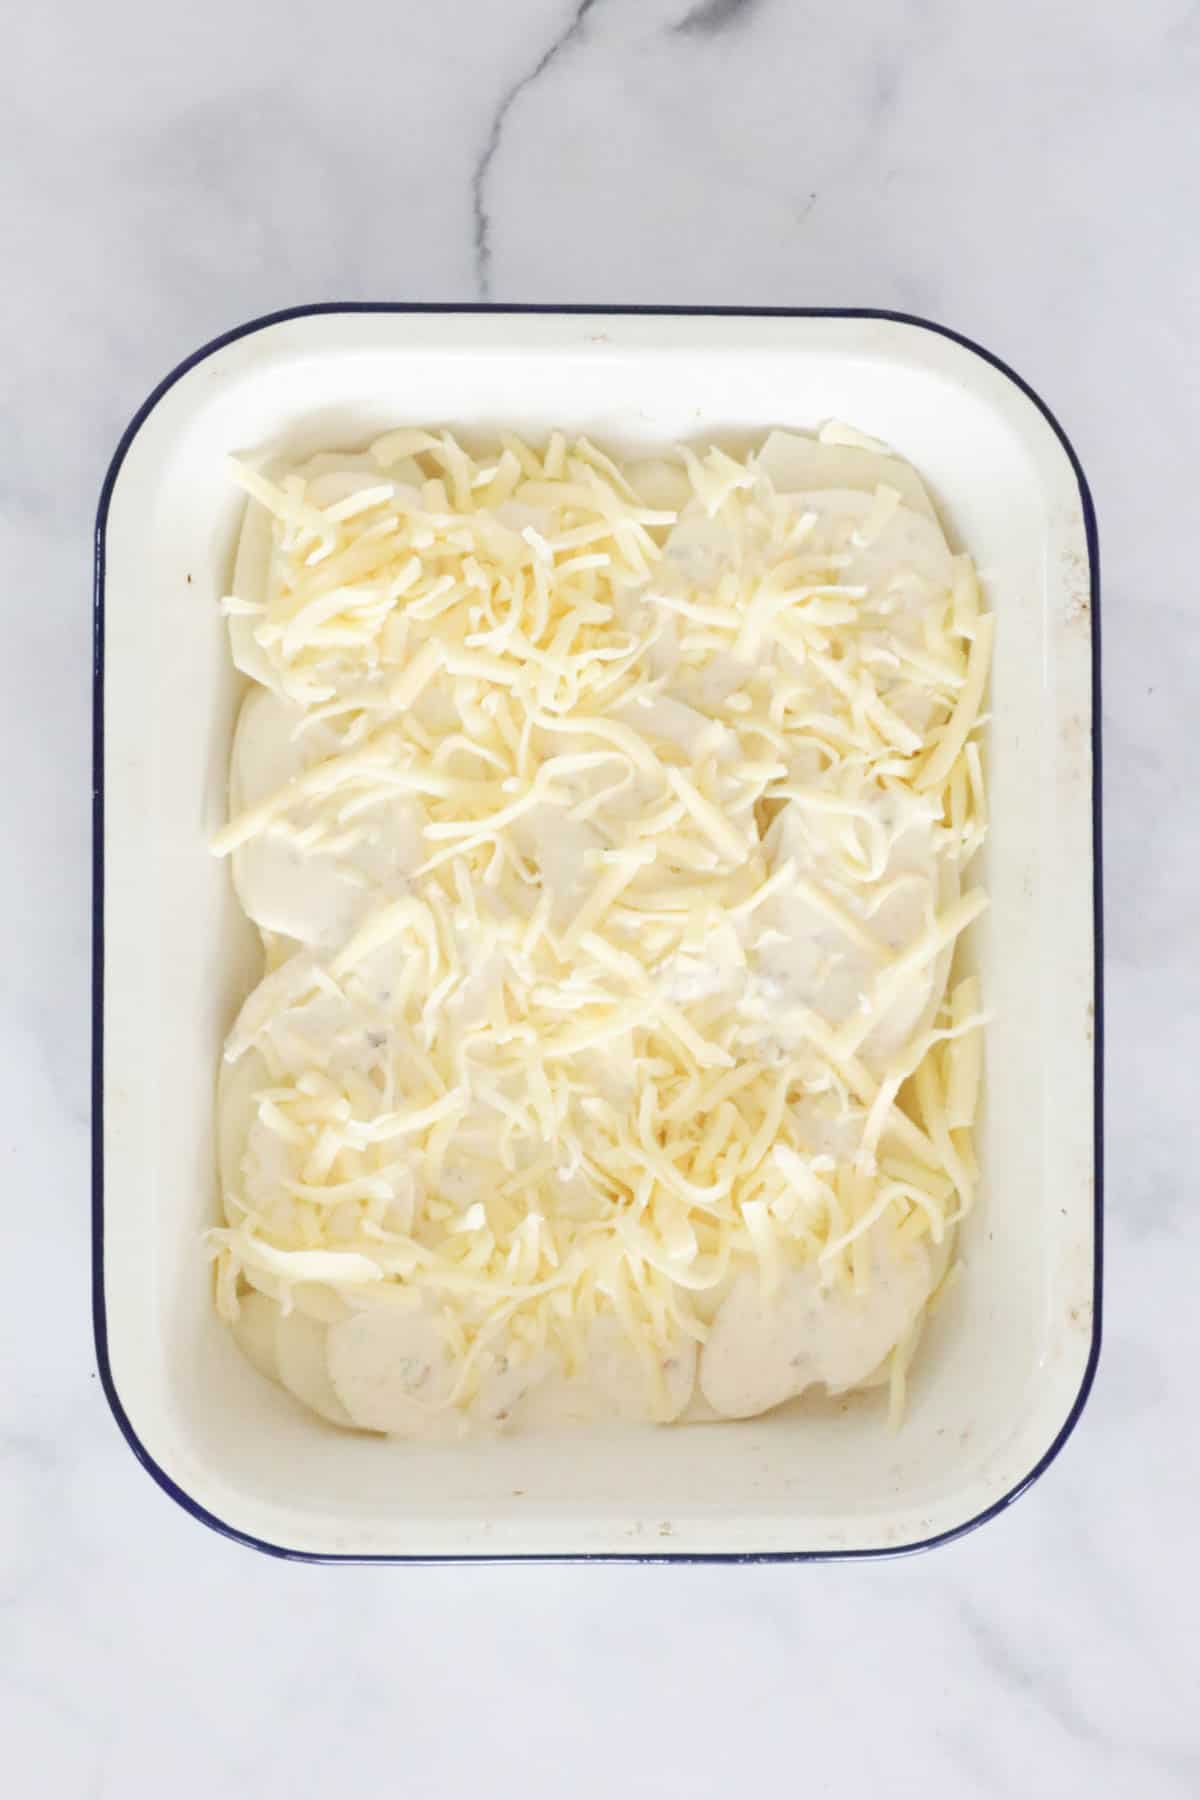 A layer of sliced potato, and cream mixture with shredded cheese sprinkled over top, in a baking dish.